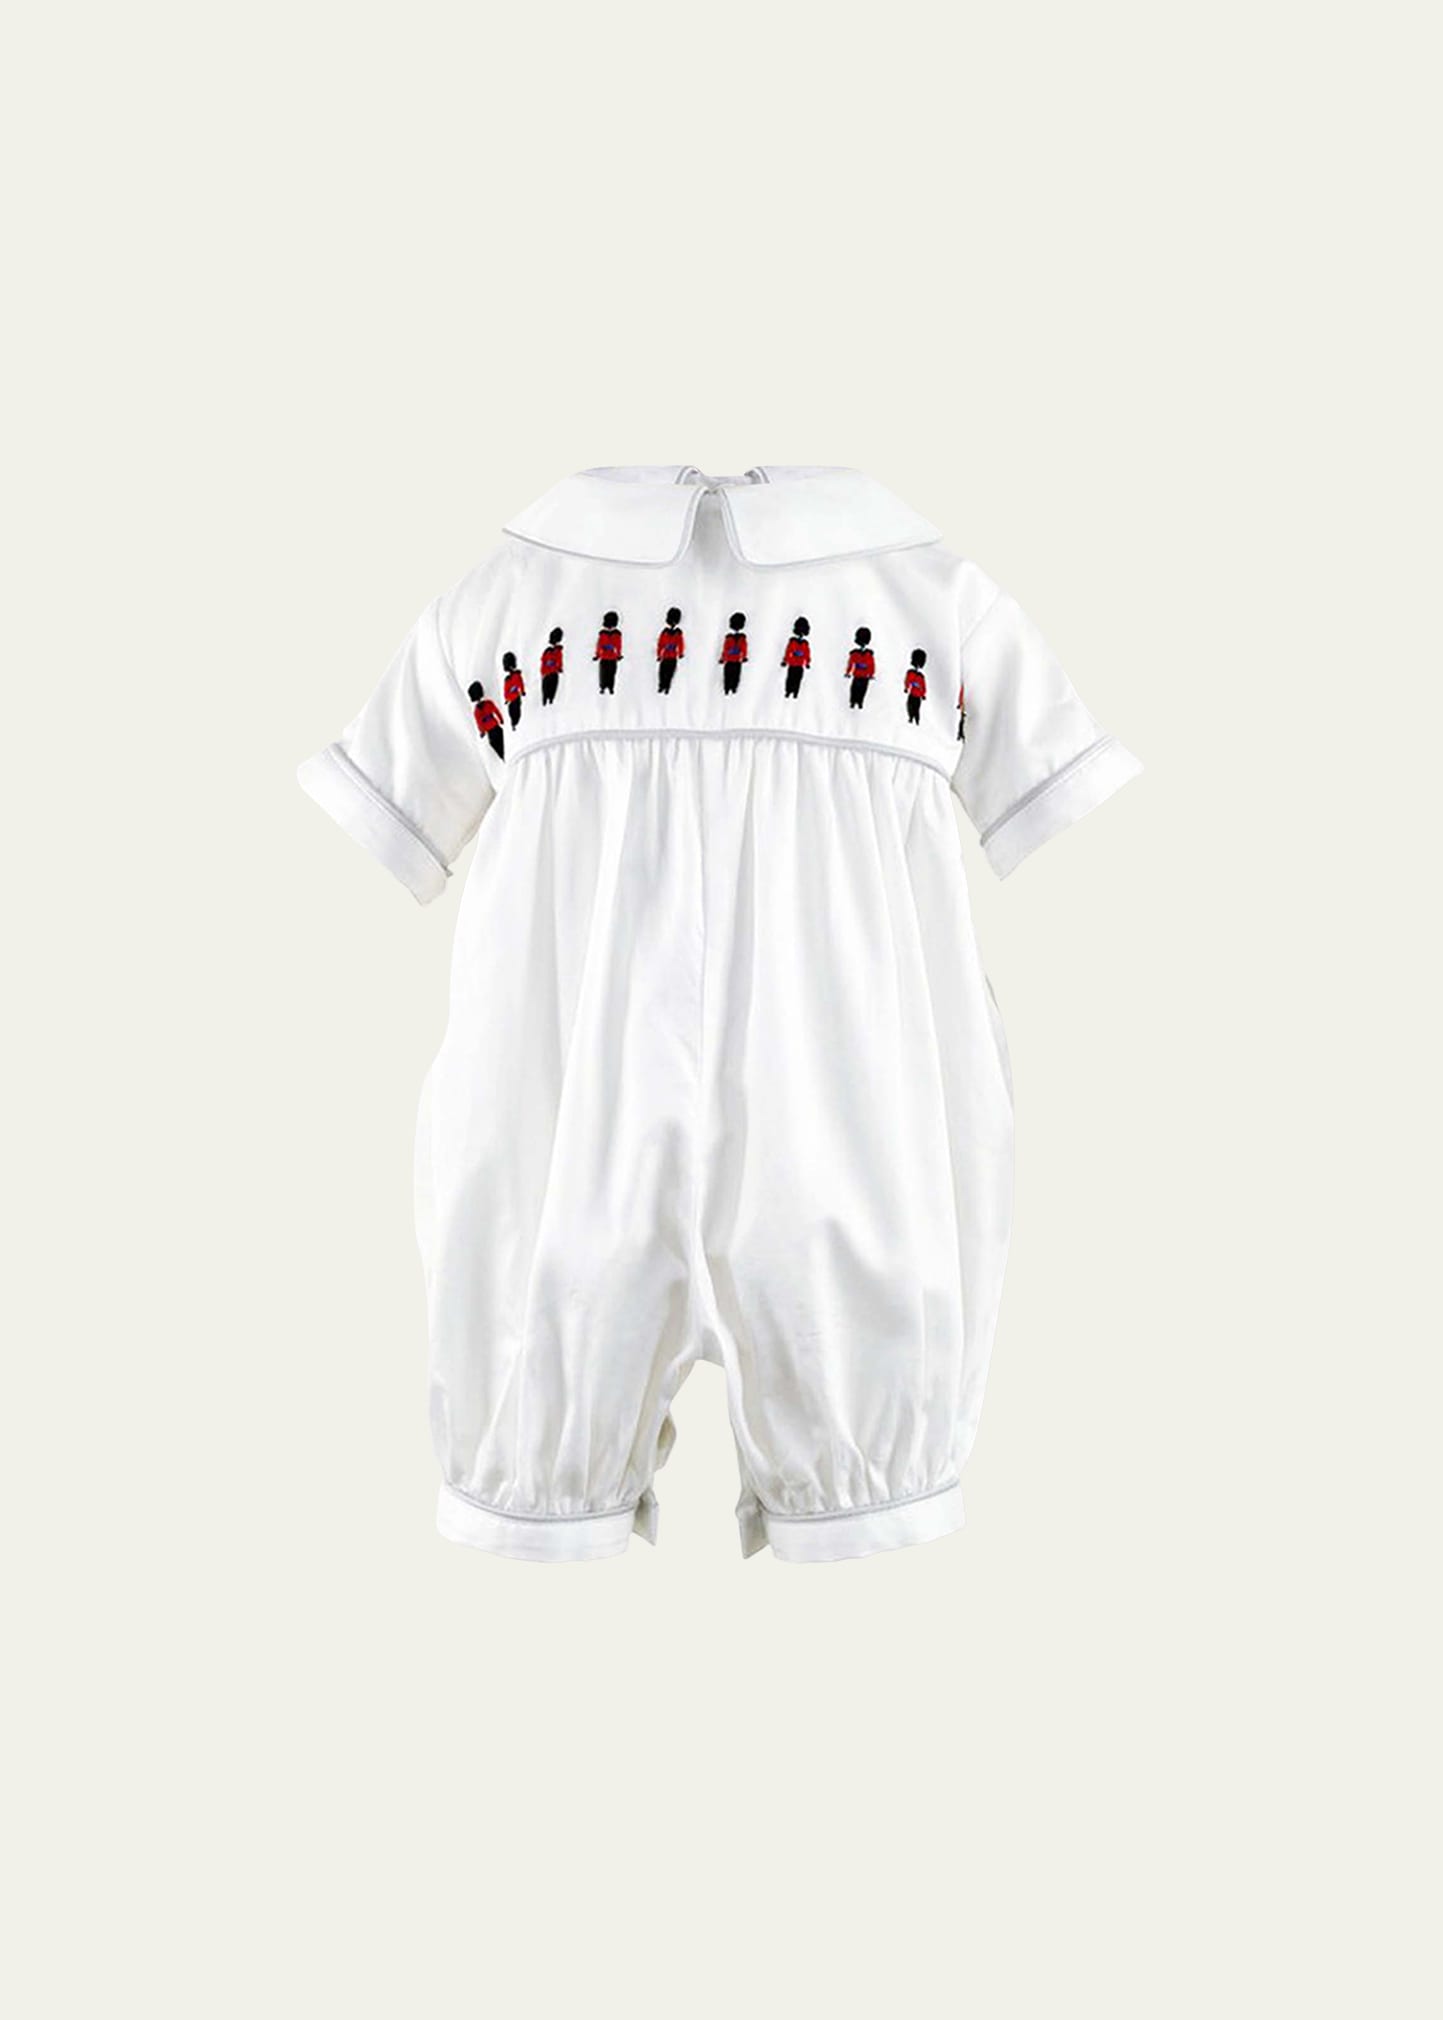 Boy's Soldier Embroidered Collared Playsuit, Size Newborn-12M